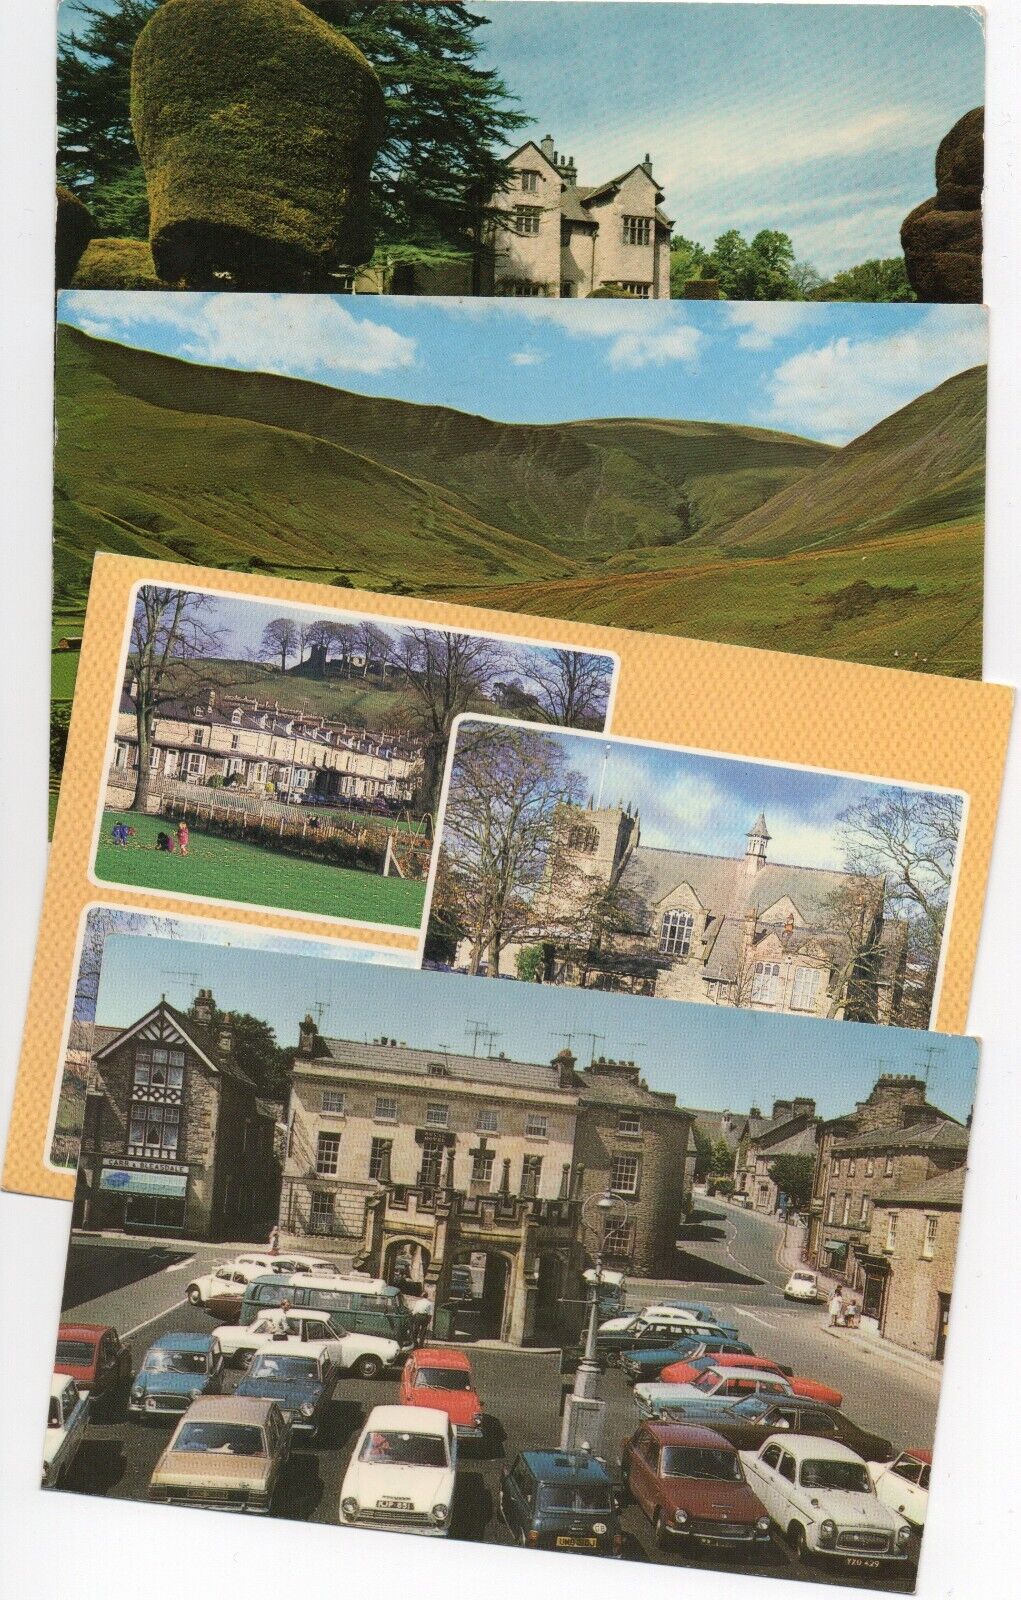 House Clearance - vintage services of Cumbria. Appleby Kendal etc. 4 cards. used. Machin heads